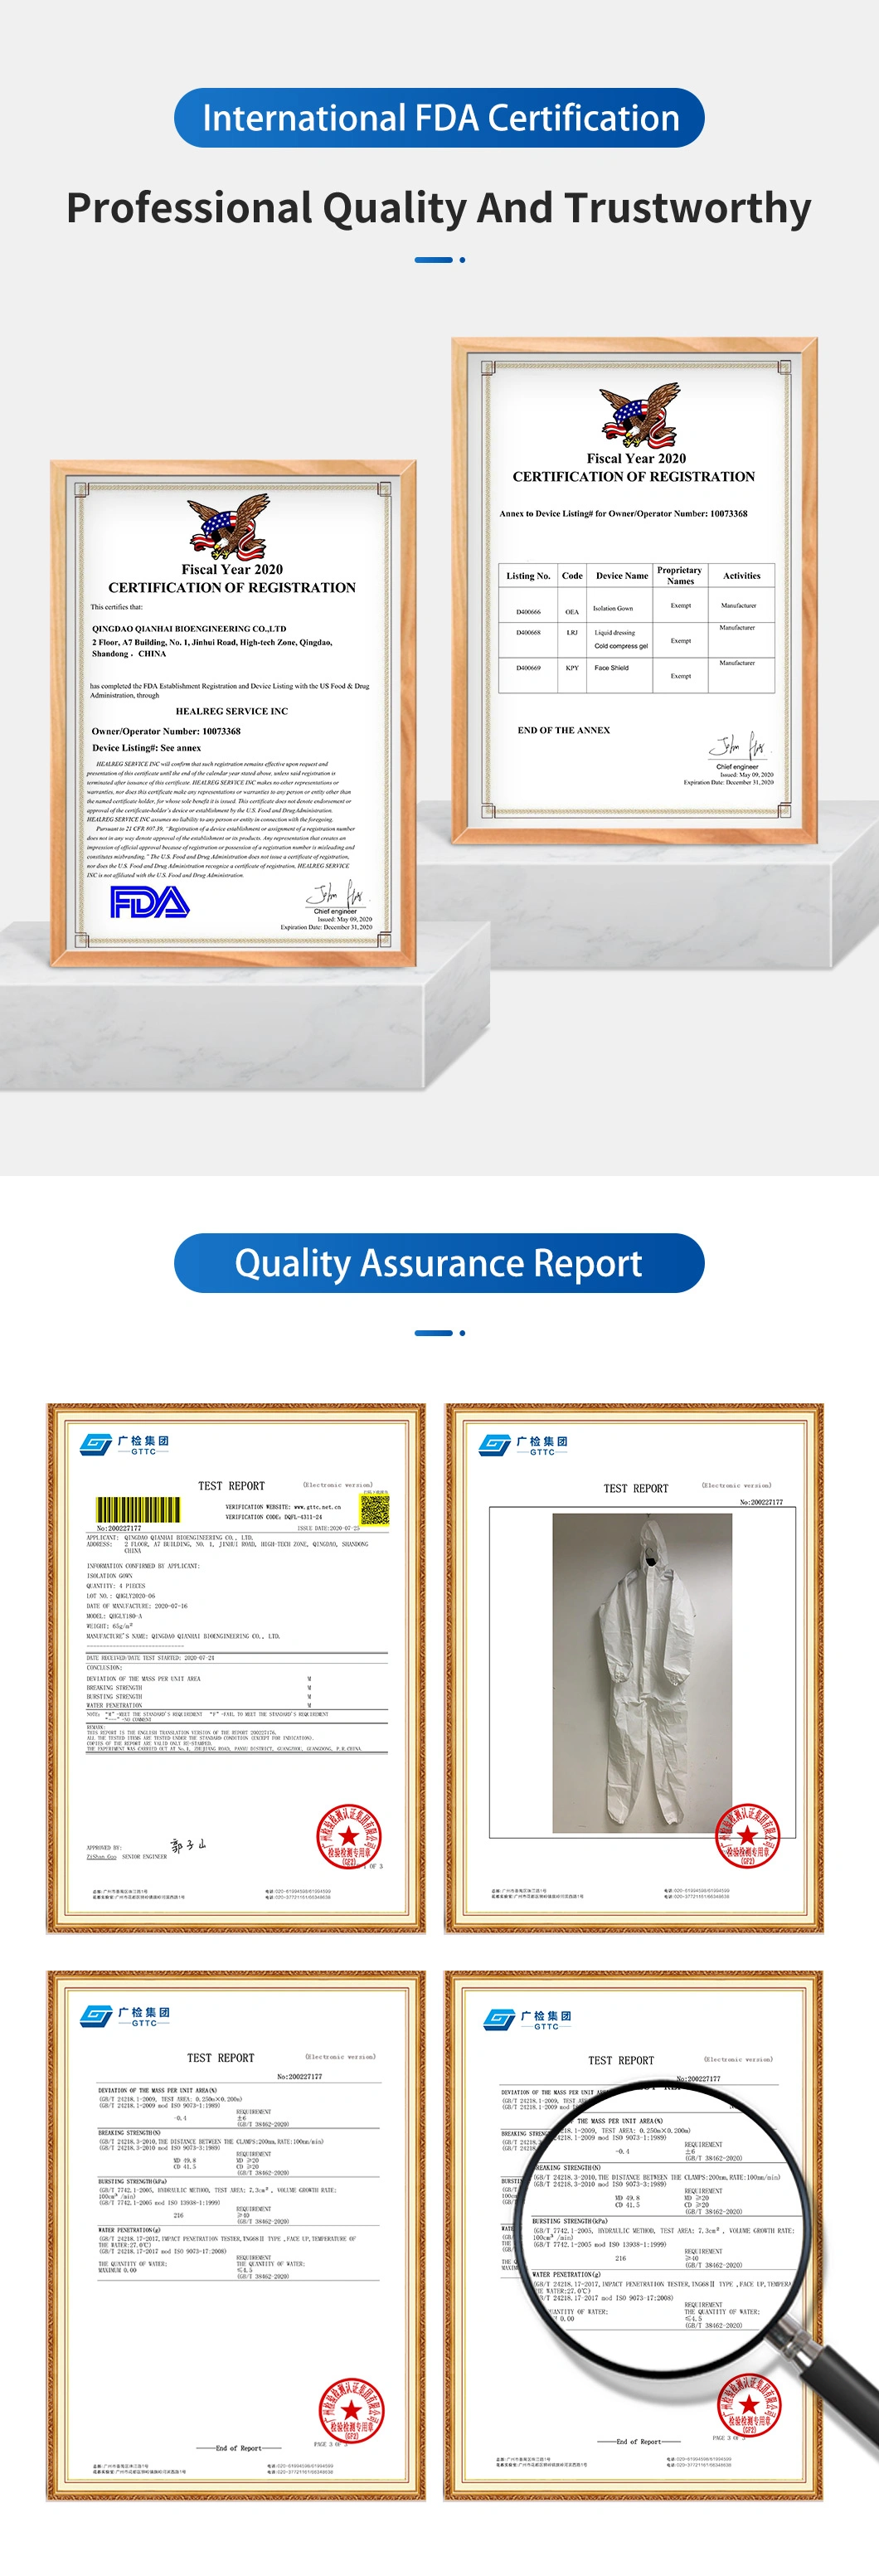 FDA Full-Body Disposable Medical/Surgical Safety Isolation Personal Protection Coverall Seam Tape